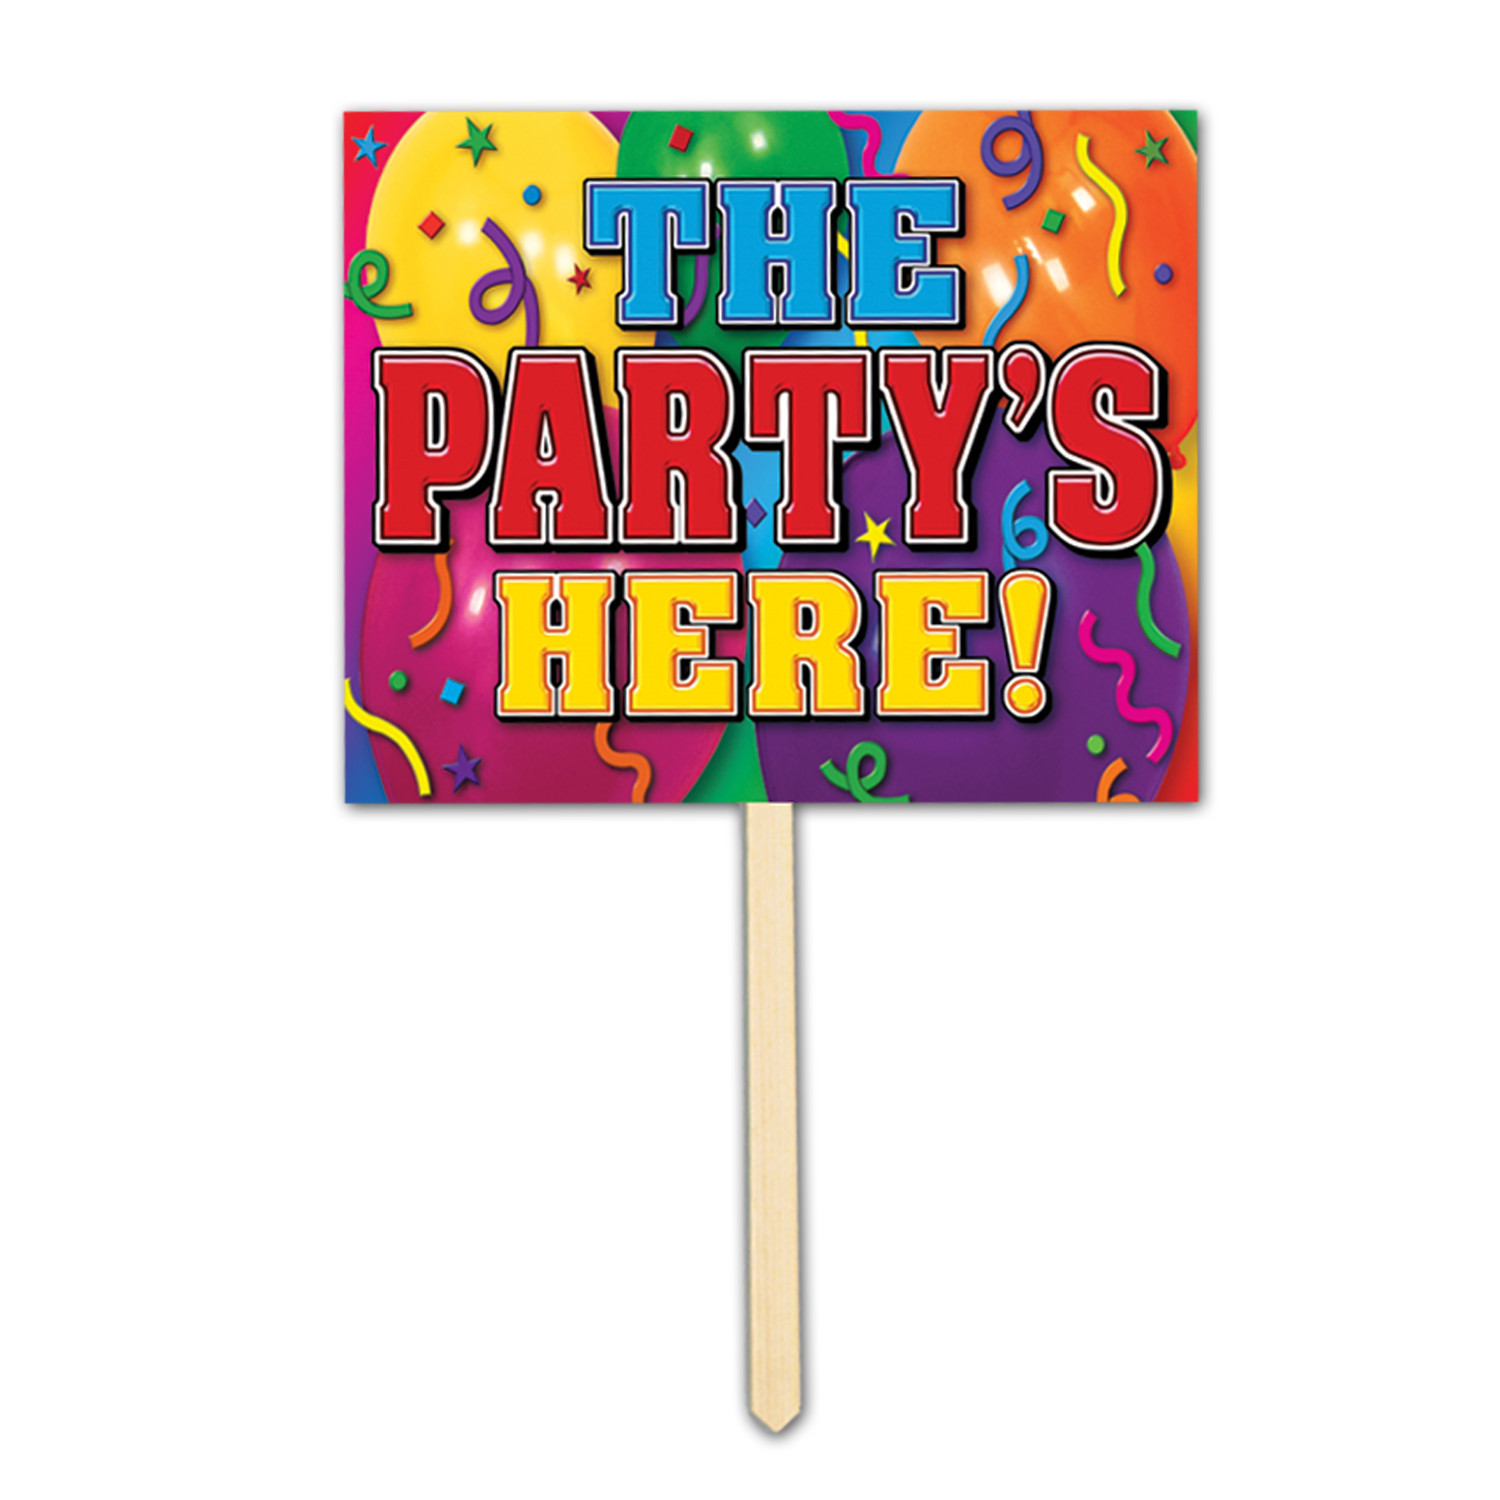 The Party's Here! Yard SIGN